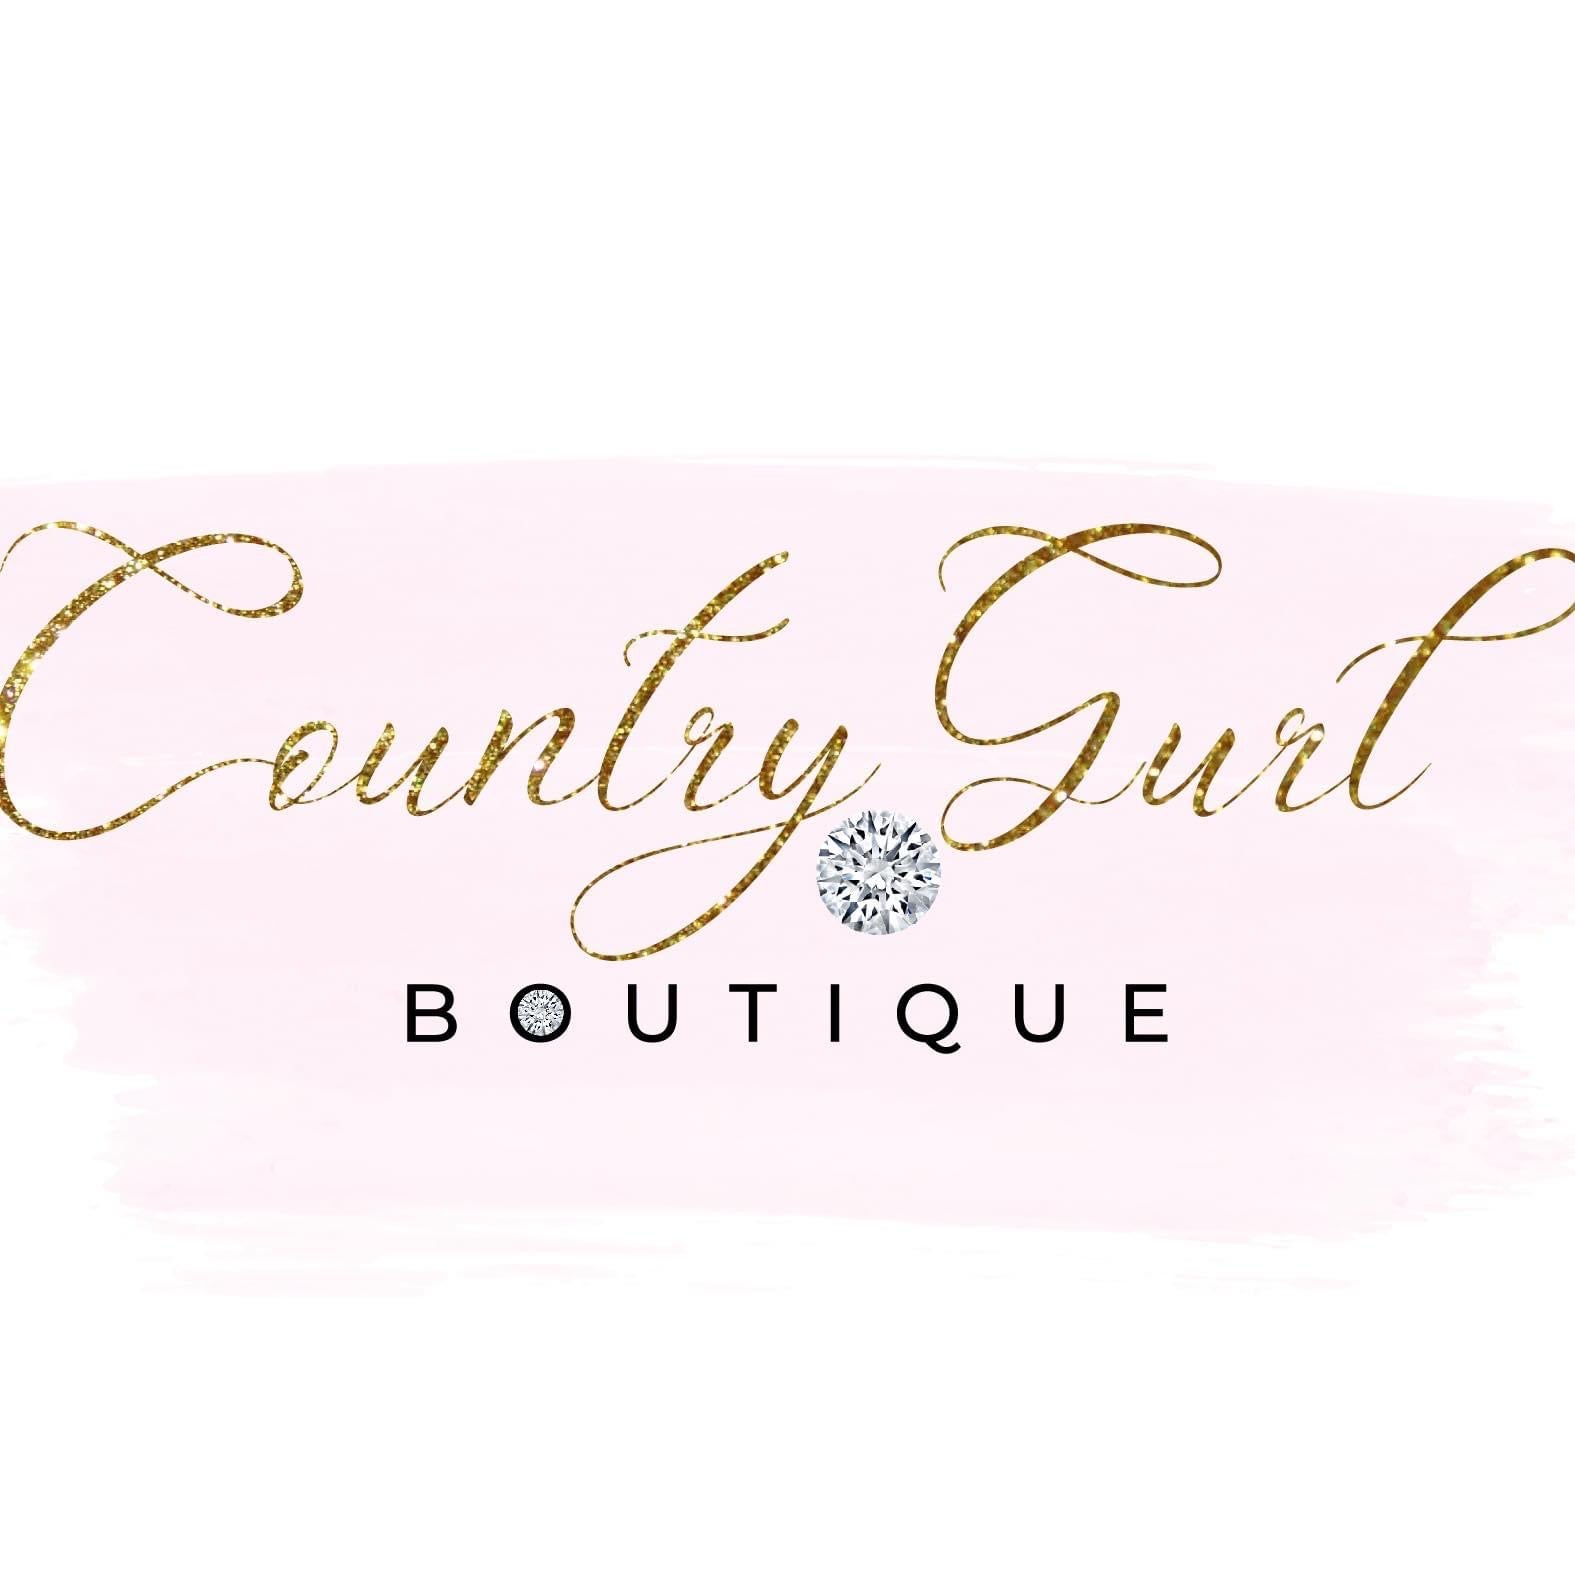 Country Gurl Boutique